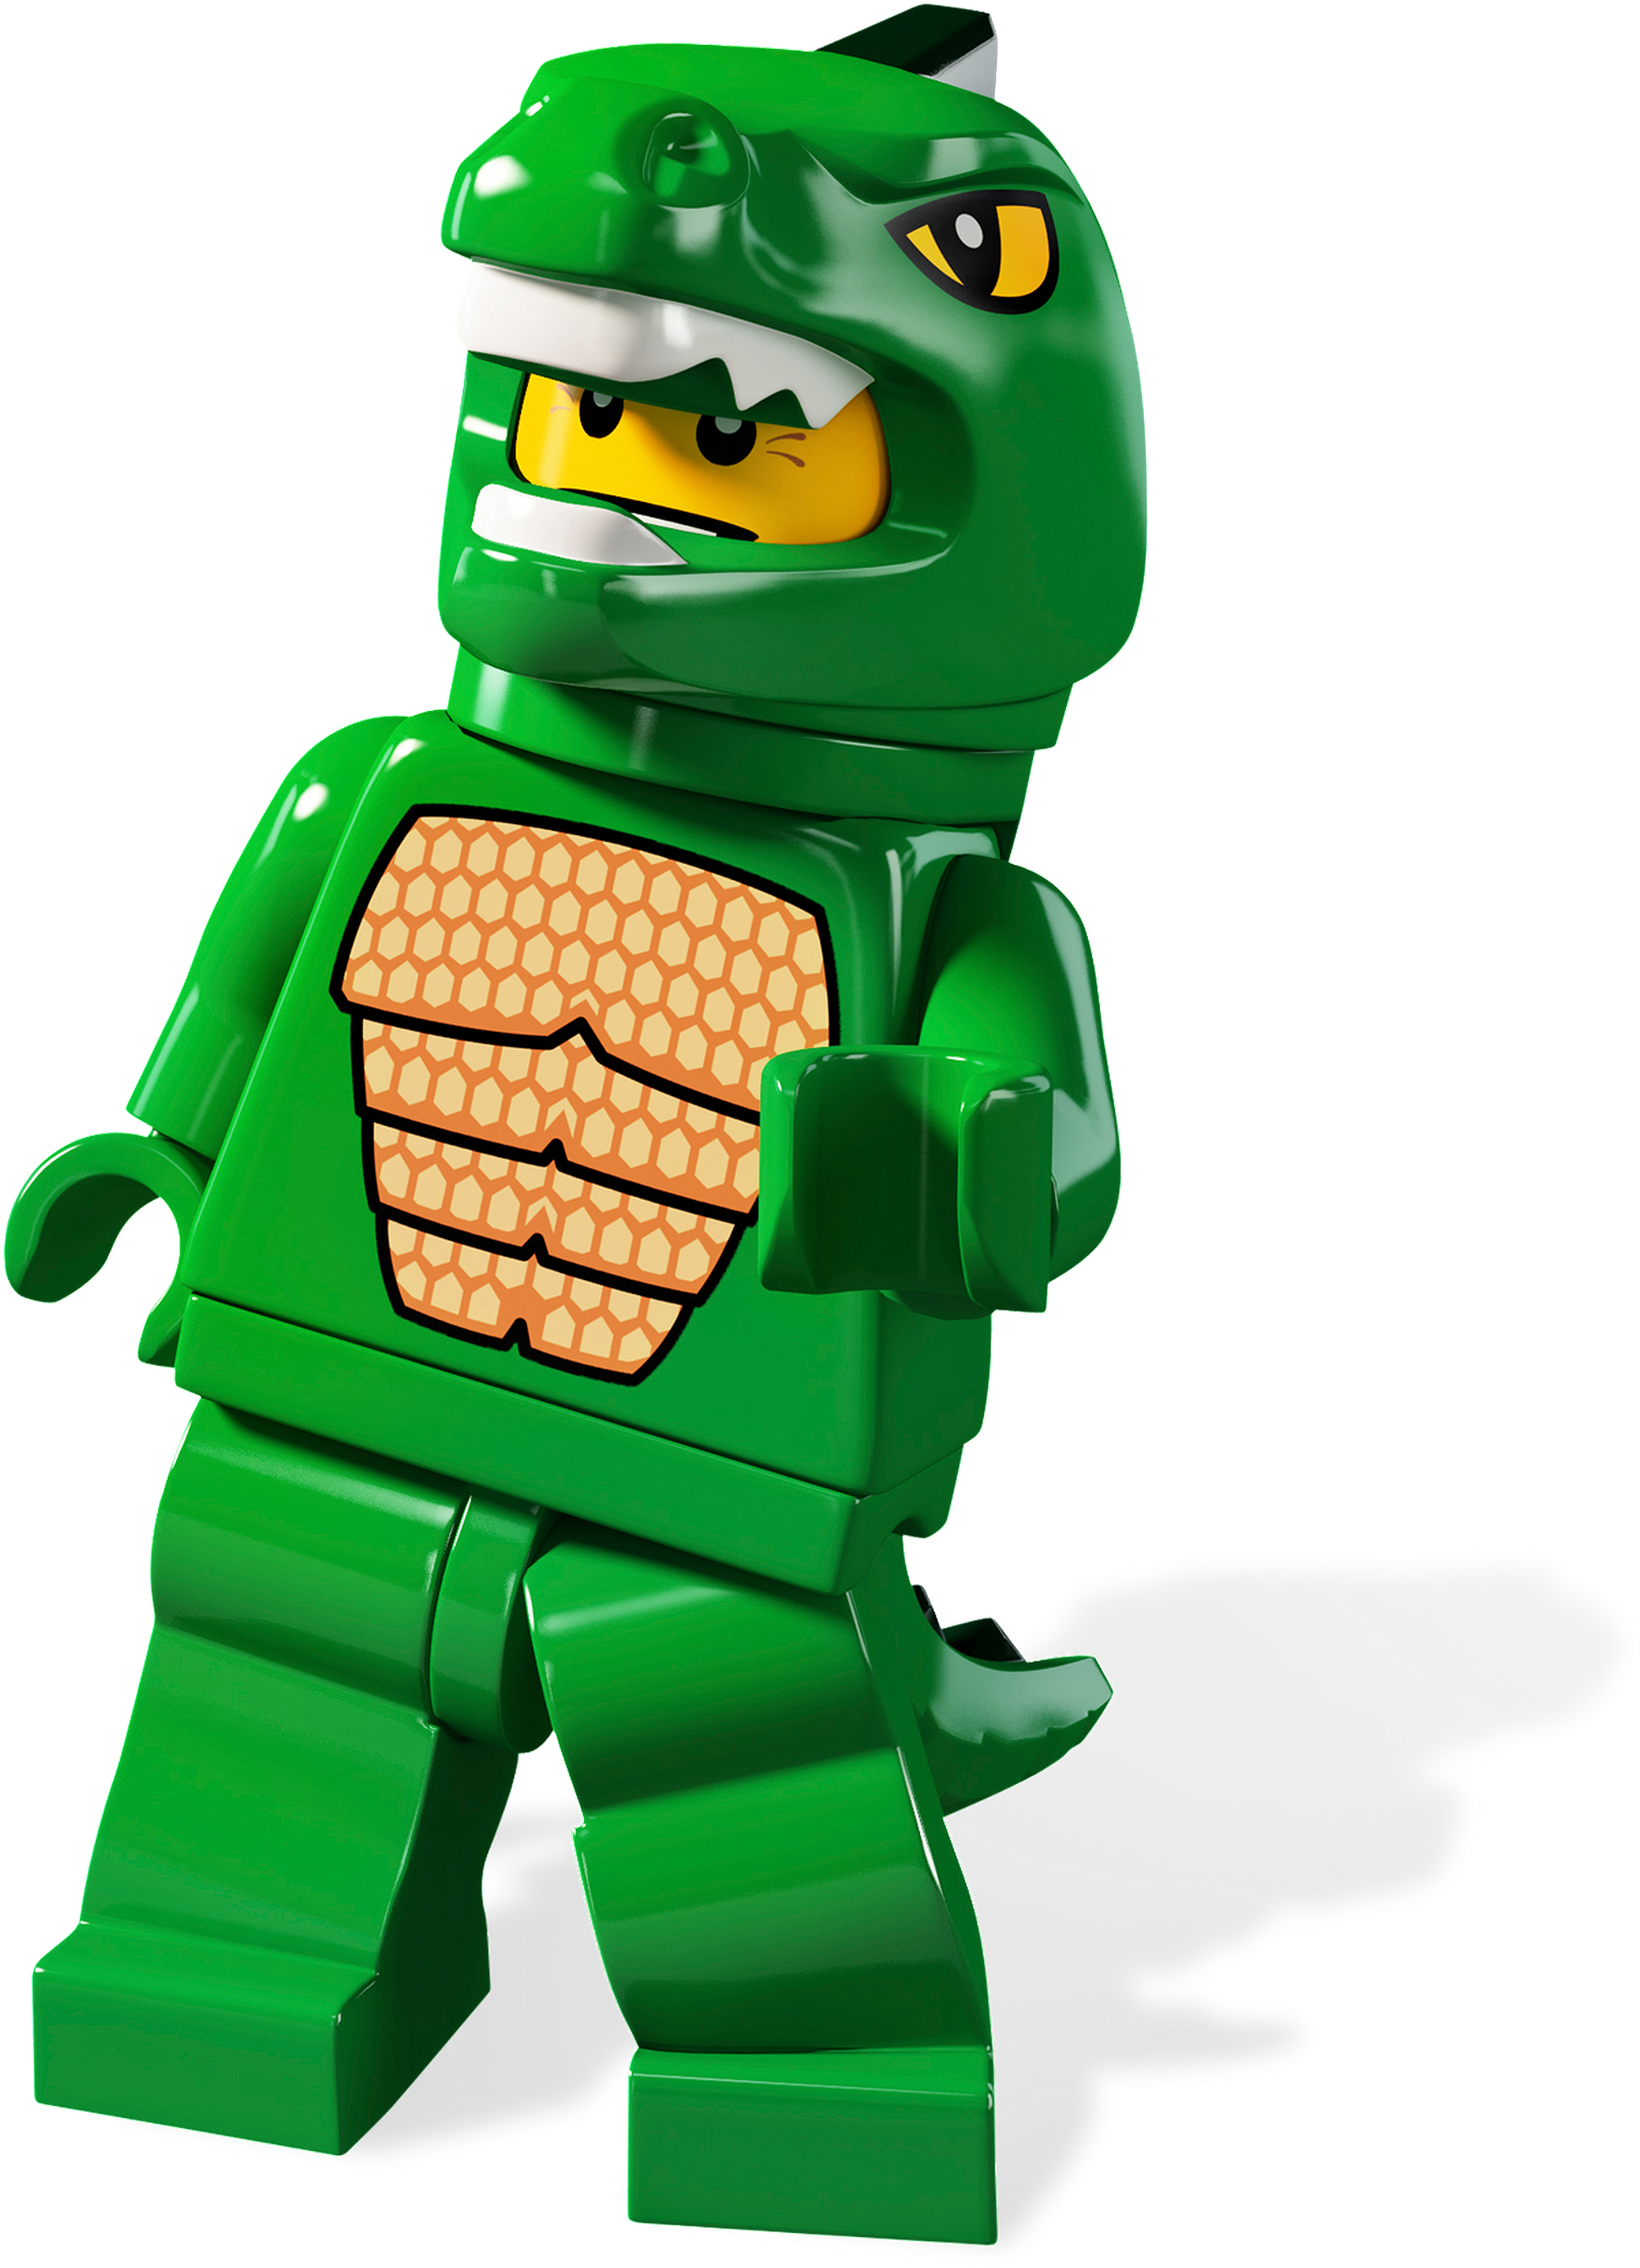 Miniature Lego Minifigure Collectibles Kiddie PNG